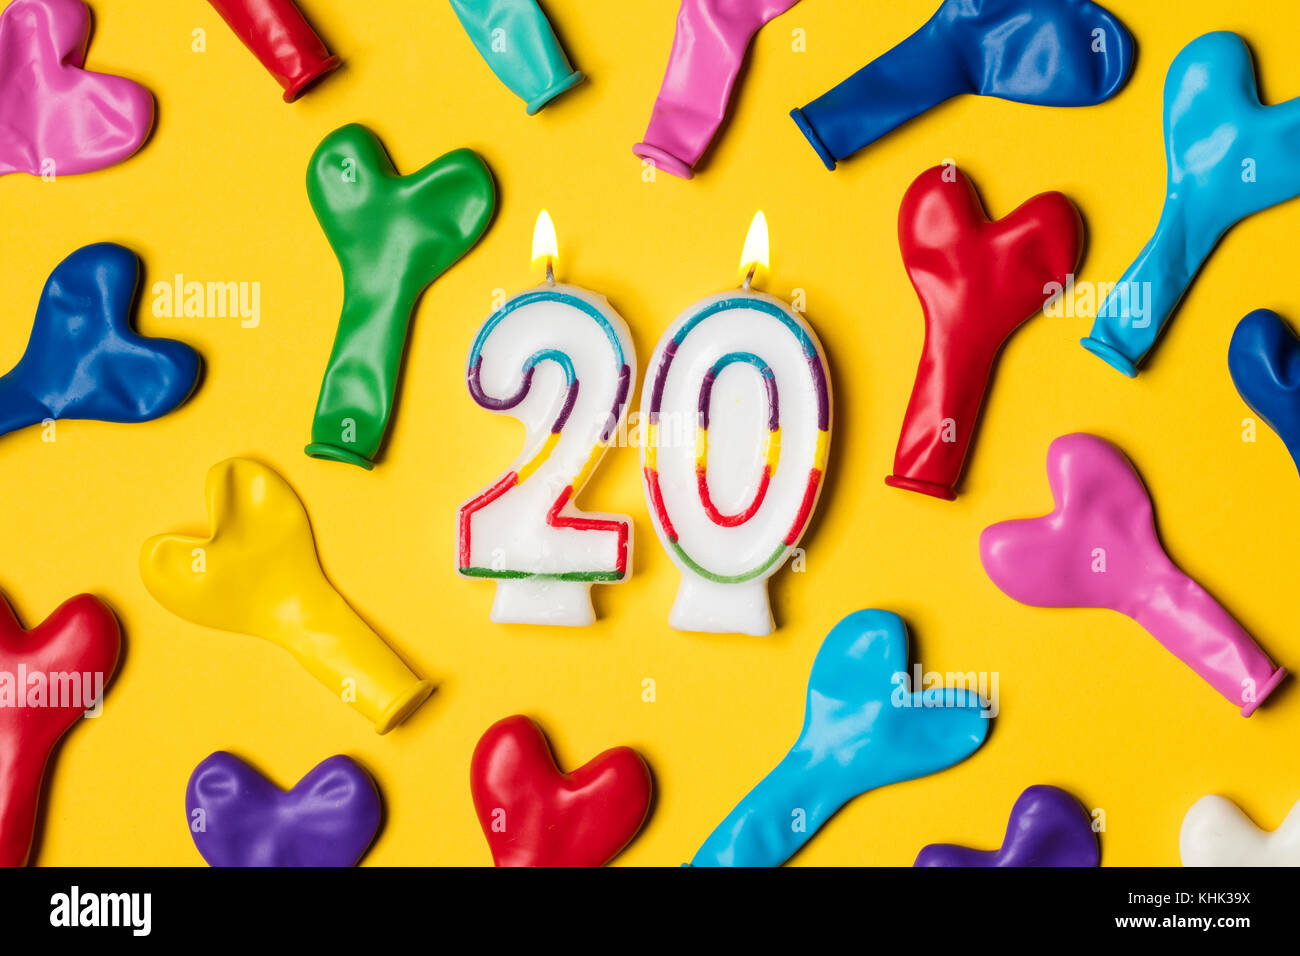 Number 20 candle with party balloons on a bright yellow background Stock Photo